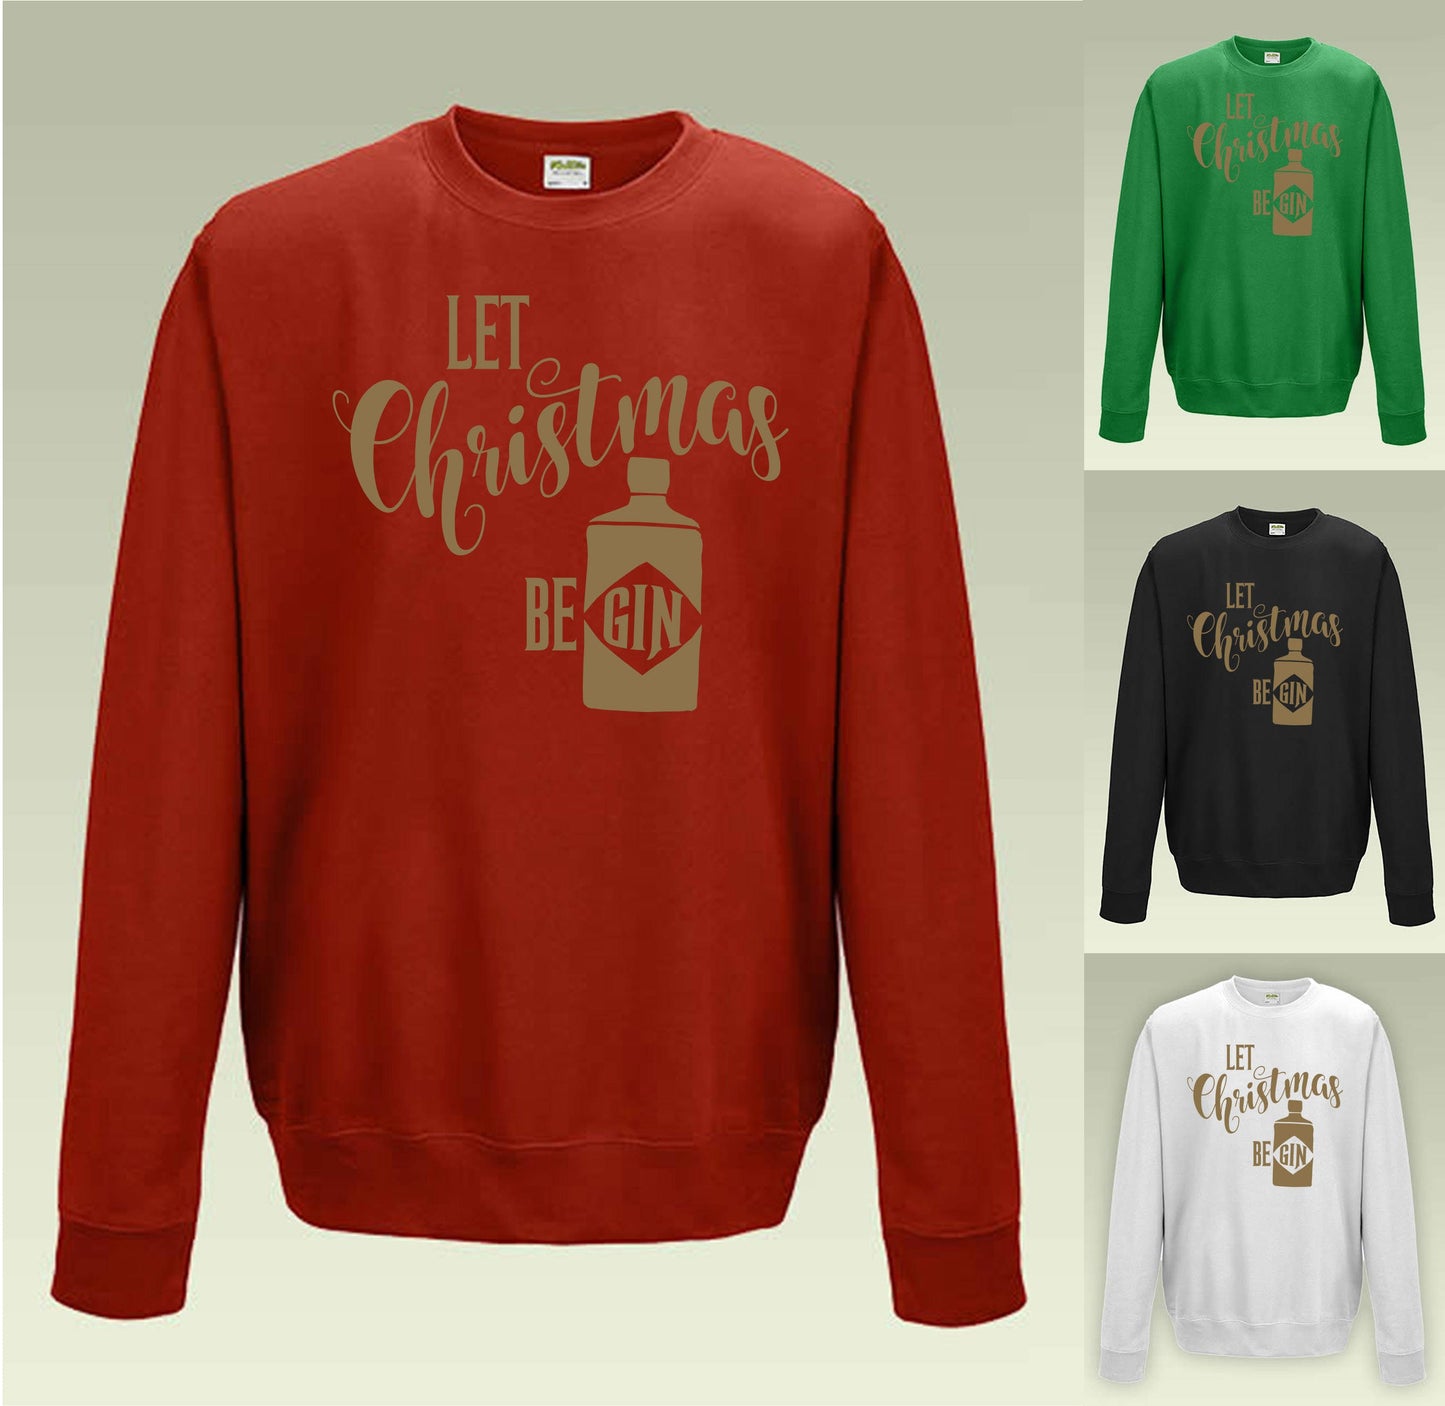 Let Christmas Be GIN Sweatshirt JH030 Funny Jumper Sweater